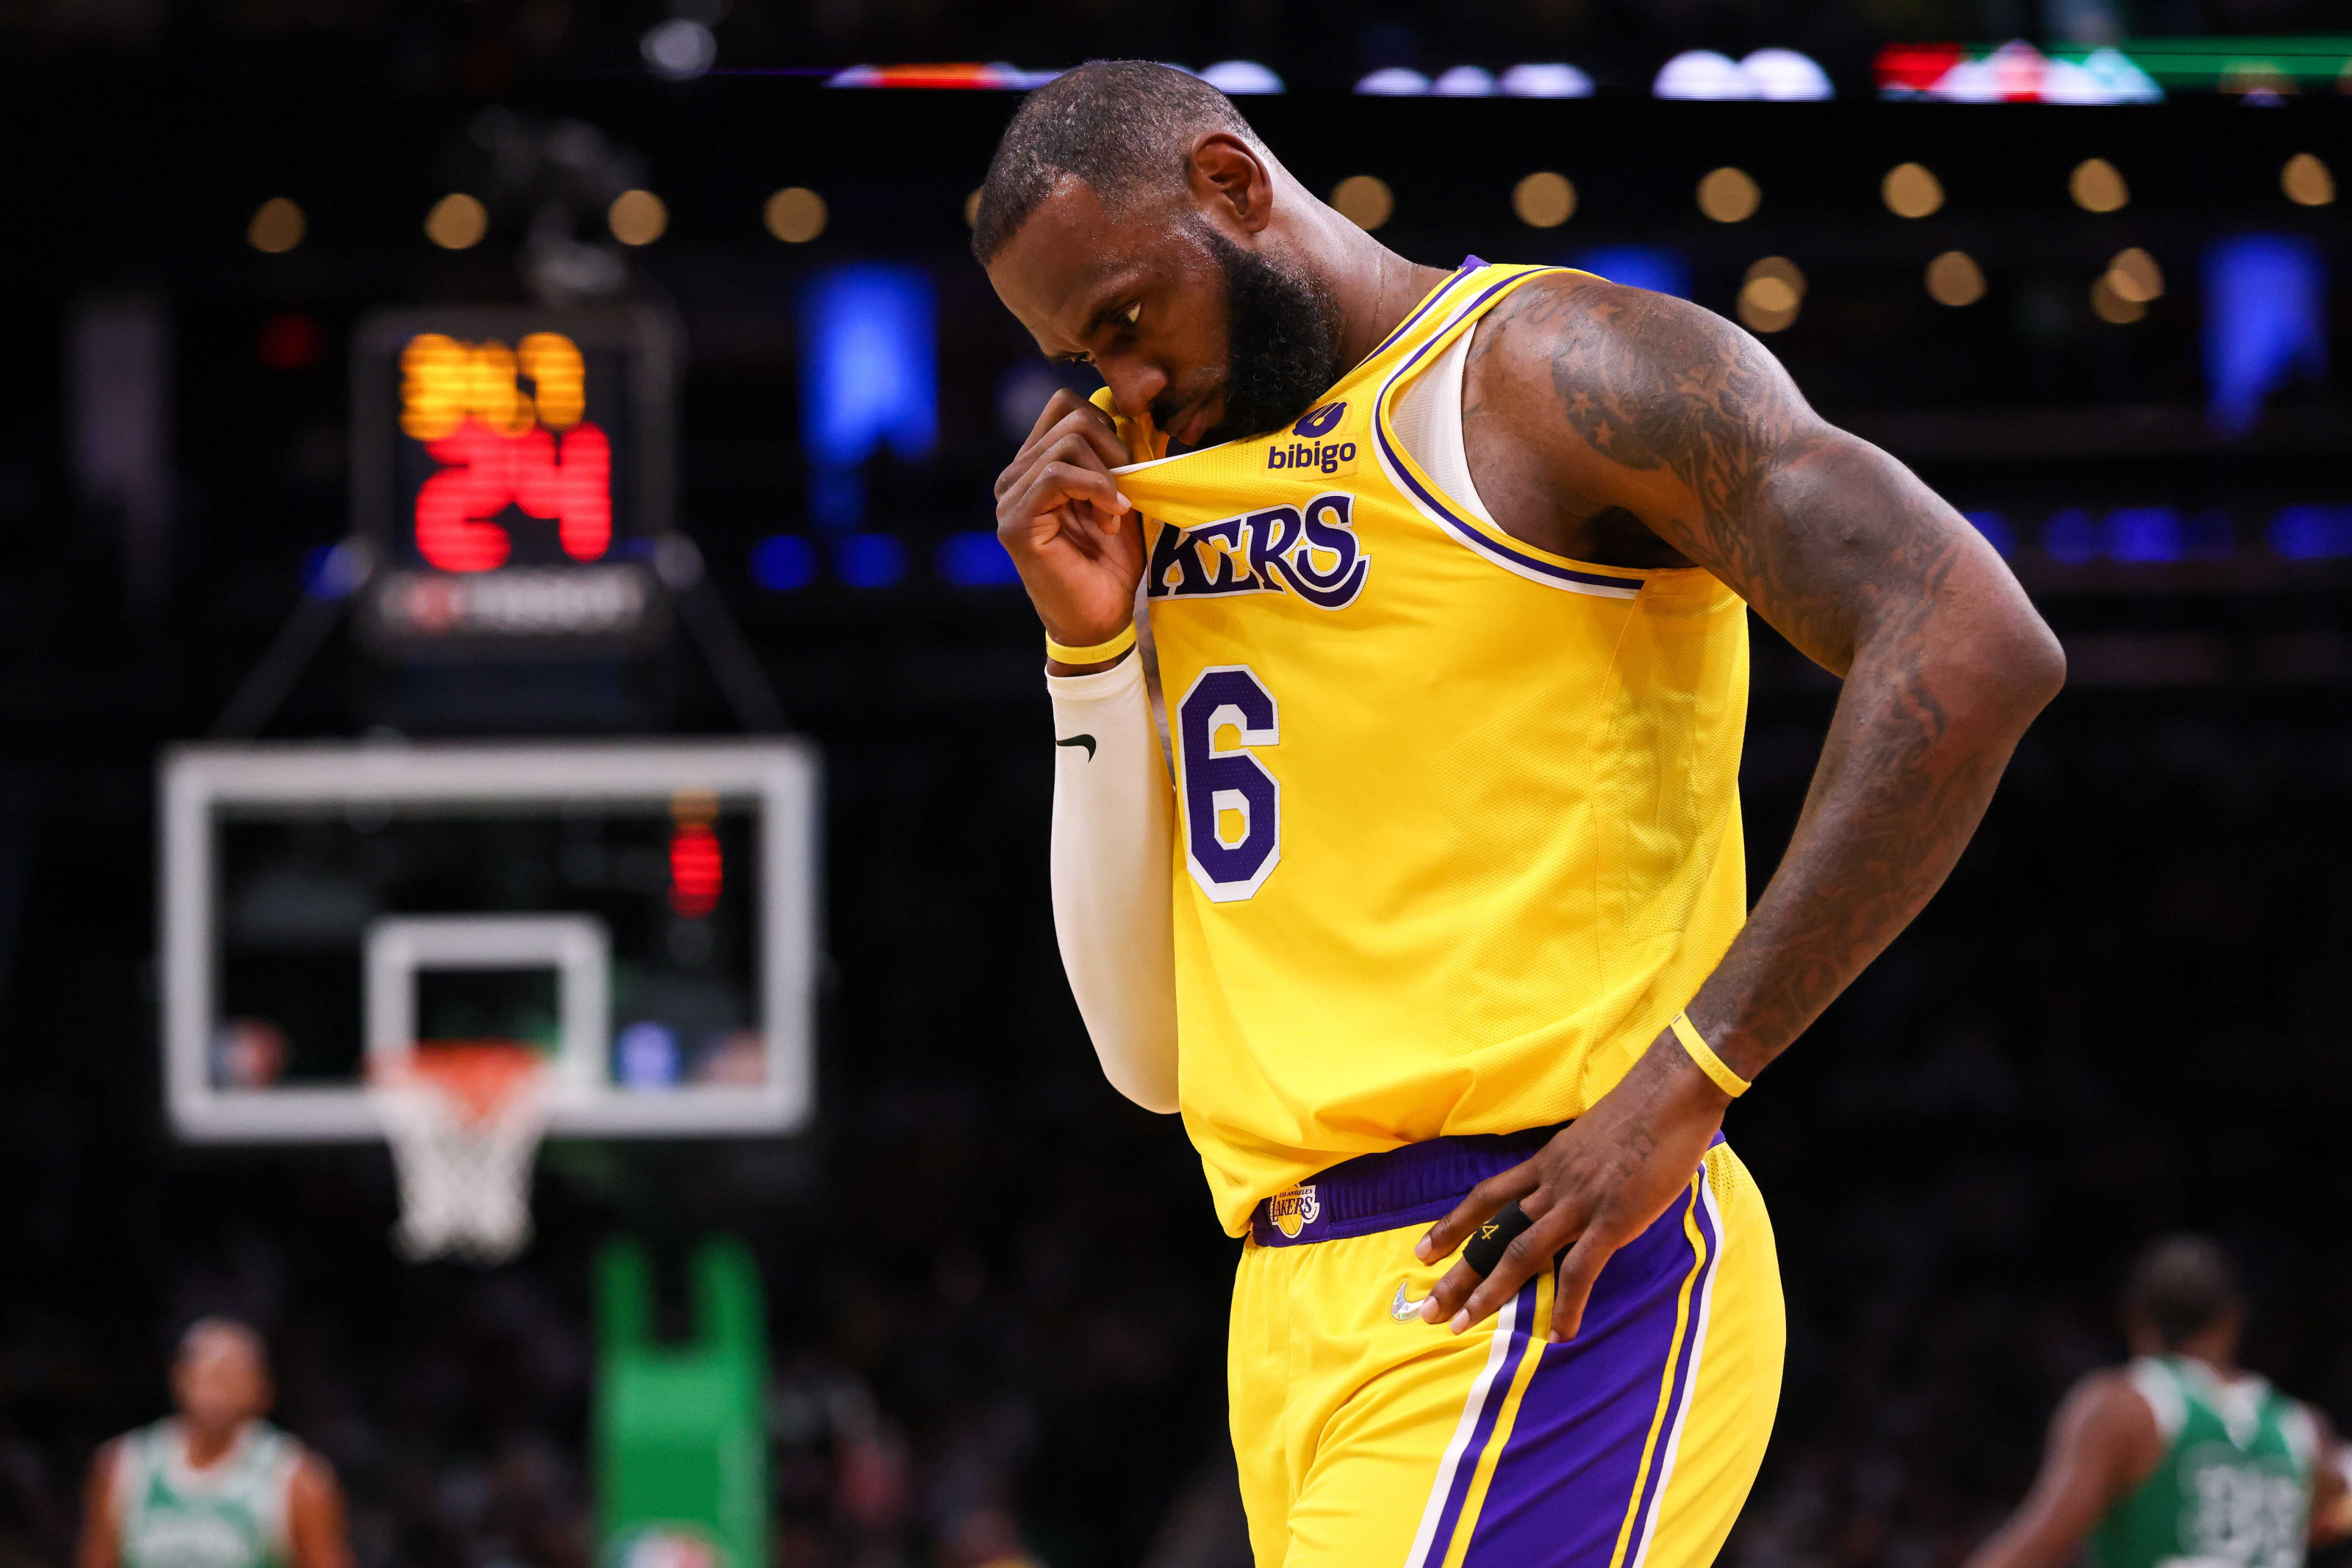 Lakers star LeBron James becomes first player in NBA history with 30K  points, 10K rebounds and 10K assists